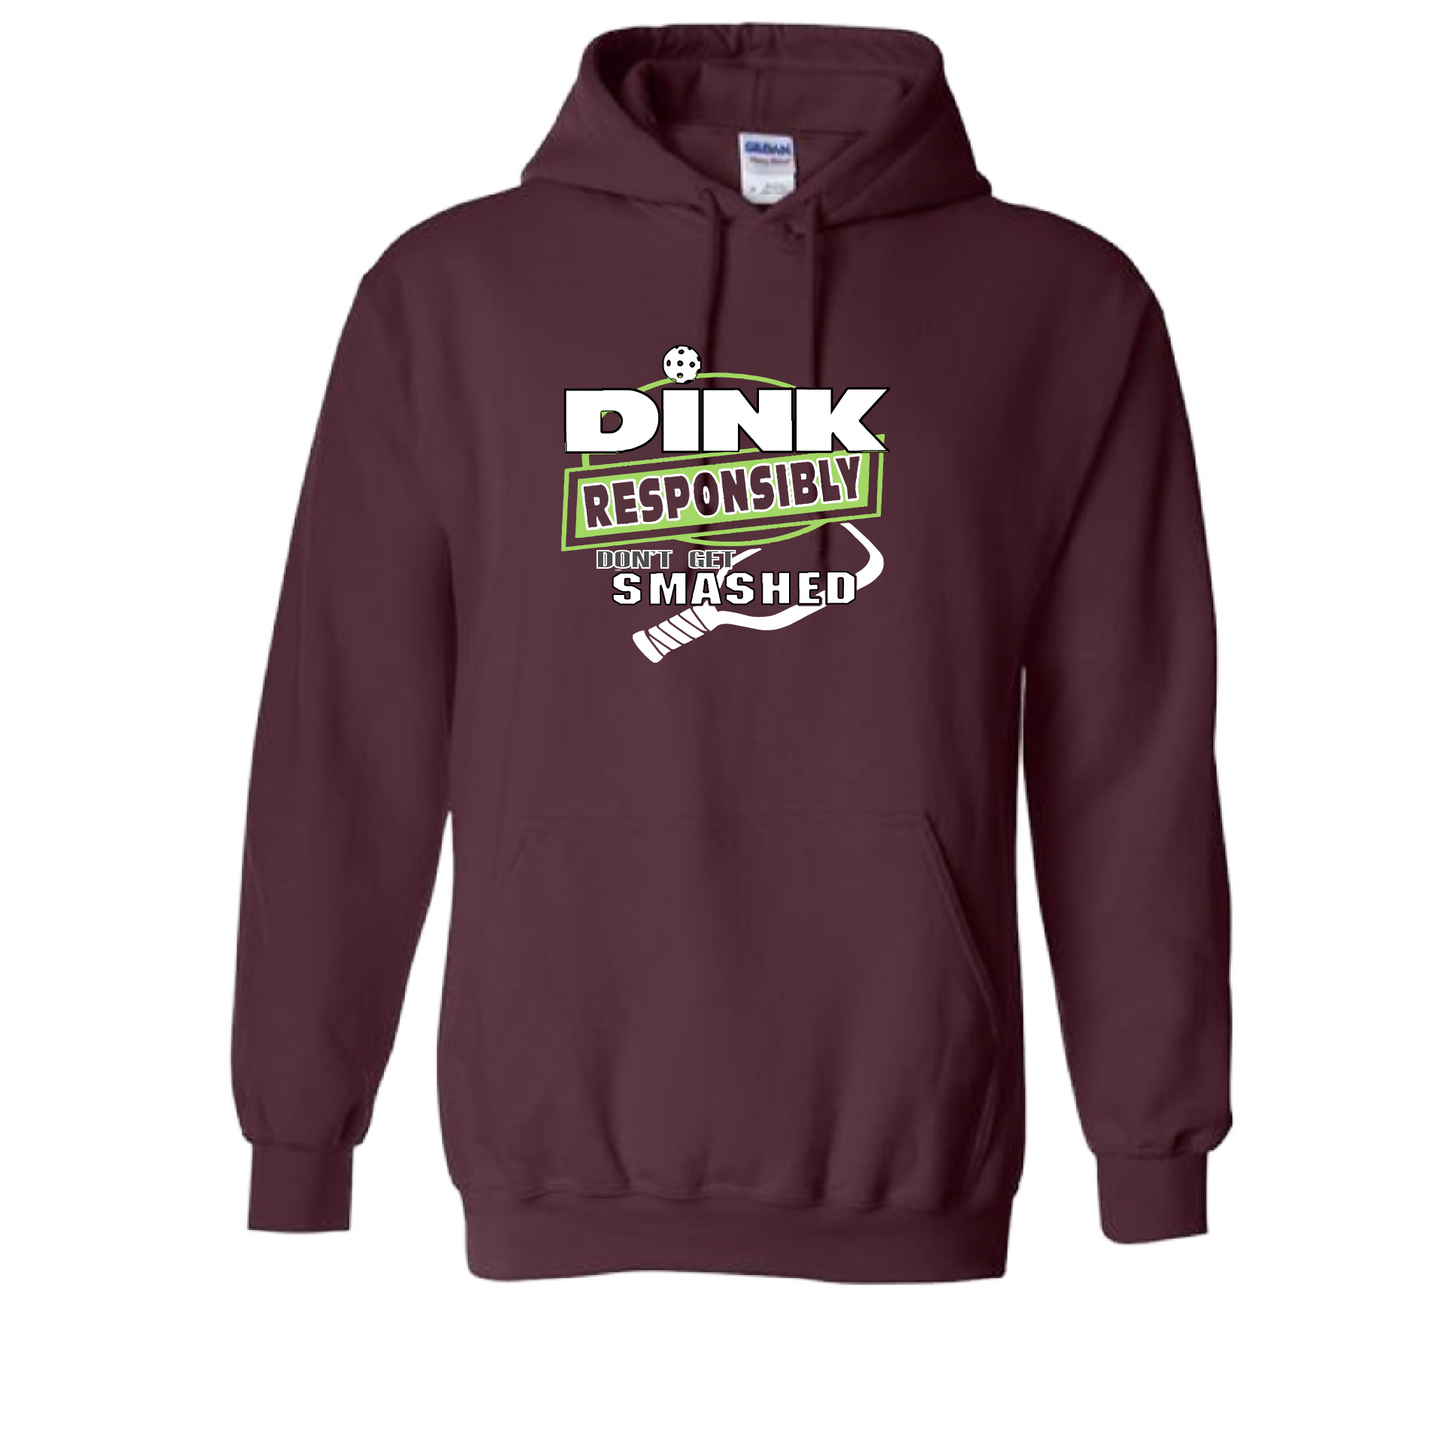 Pickleball Design:  Dink Responsibly – Don’t get Smashed  Unisex Hooded Sweatshirt: Moisture-wicking, double-lined hood, front pouch pocket.  This unisex hooded sweatshirt is ultra comfortable and soft. Stay warm on the Pickleball courts while being that hit with this one of kind design.